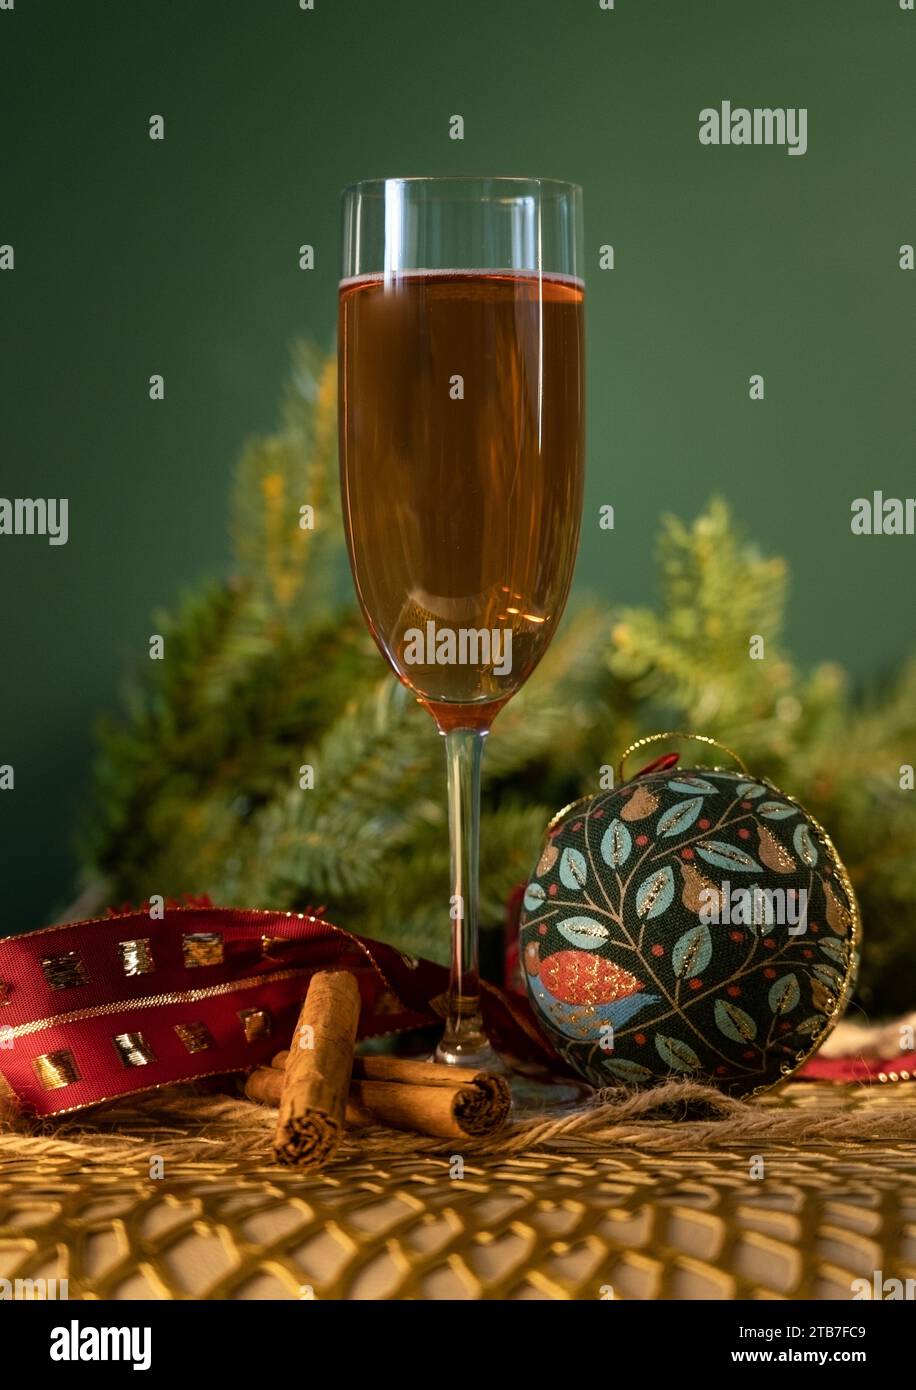 Tall glass of champagne in front of green background with Christmas tree foliage, two cinnamon sticks and a green and blue bauble Stock Photo